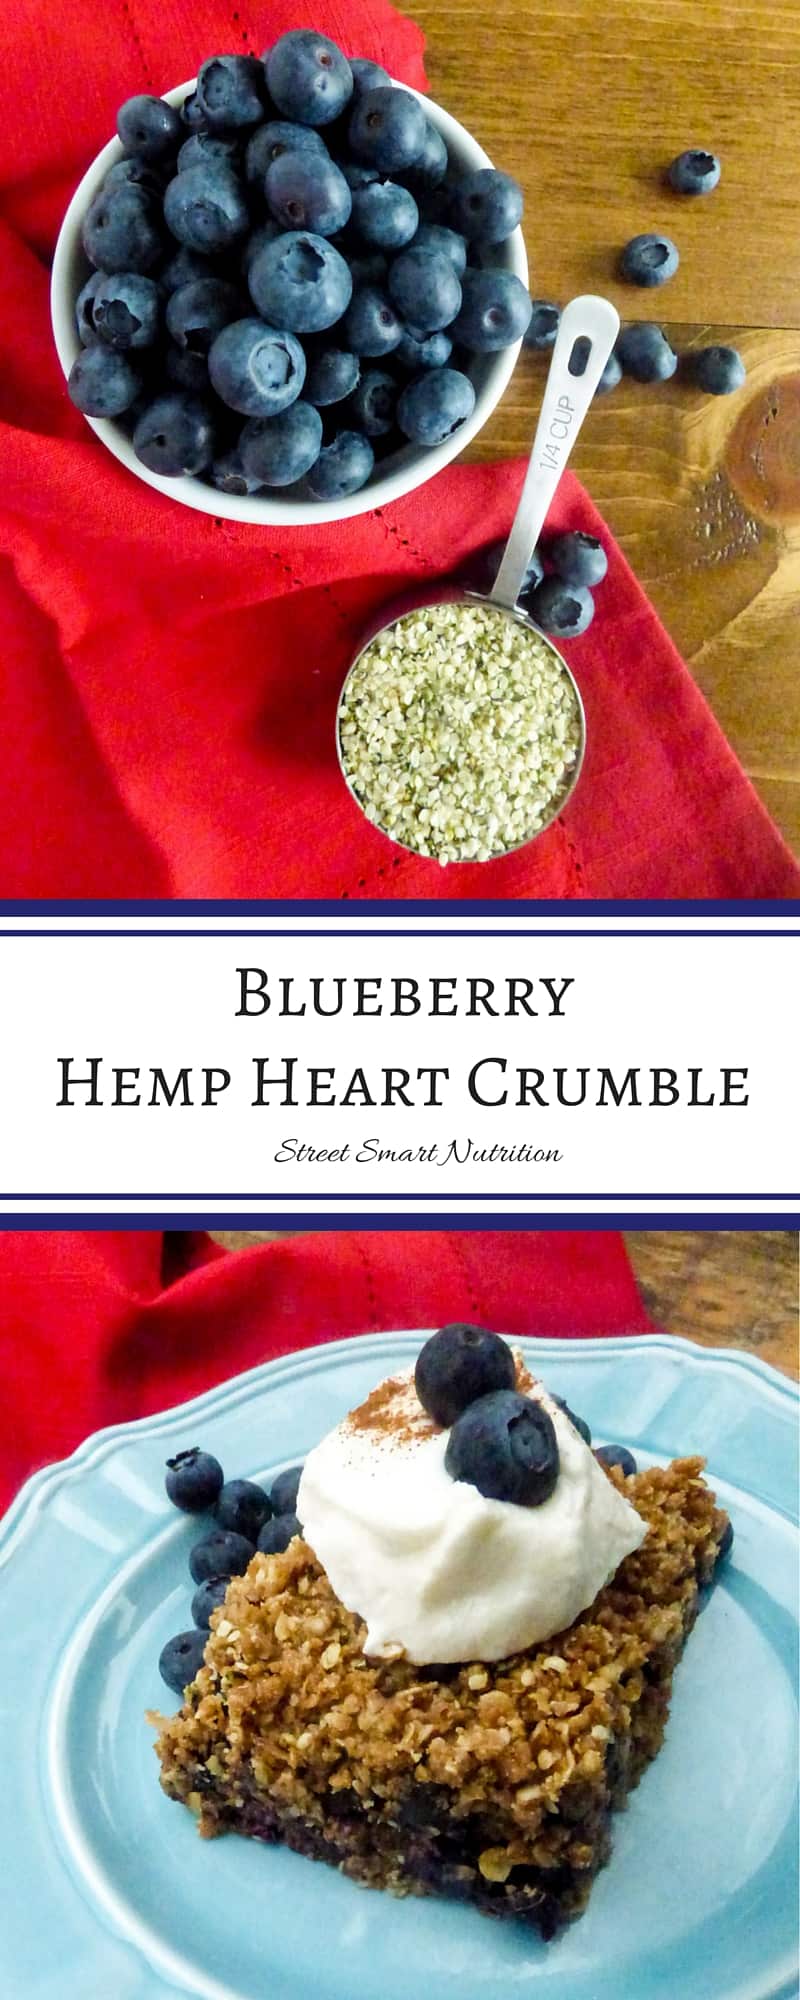 Try this Blueberry Hemp Heart Crumble from Street Smart Nutrition to celebrate with the flavors of summer